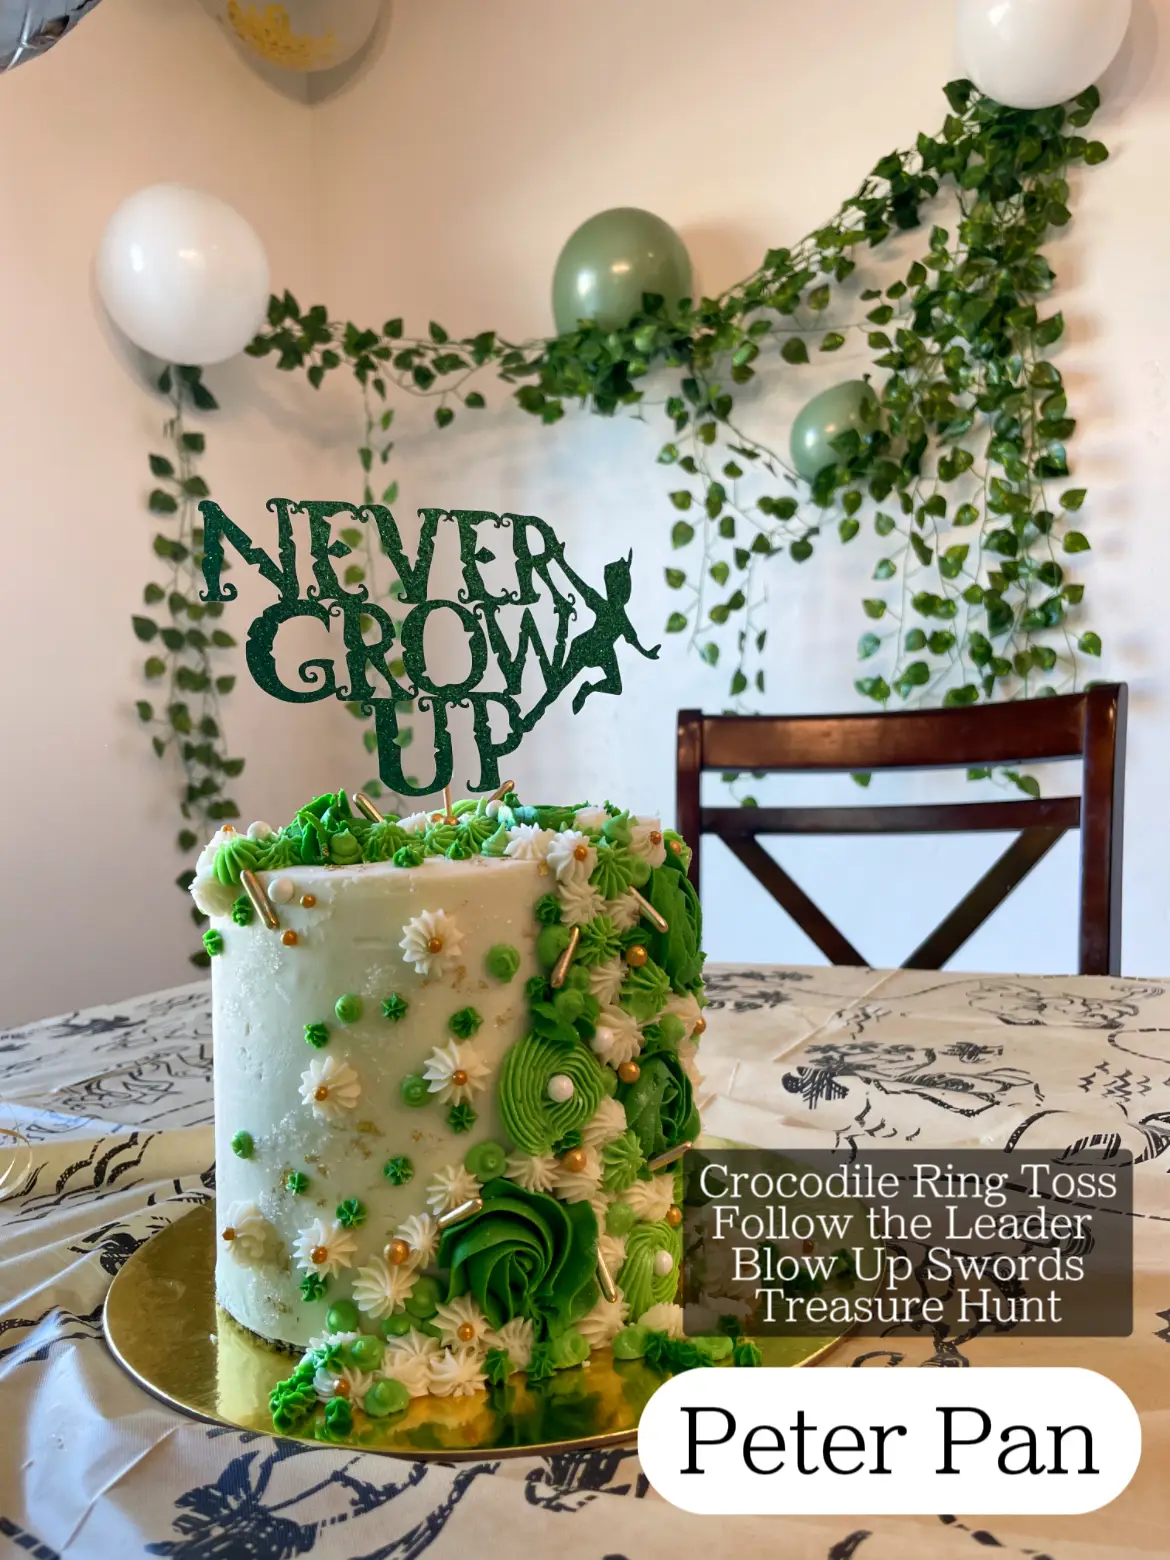 How to Throw a Peter Pan Party for a Birthday or Themed Event